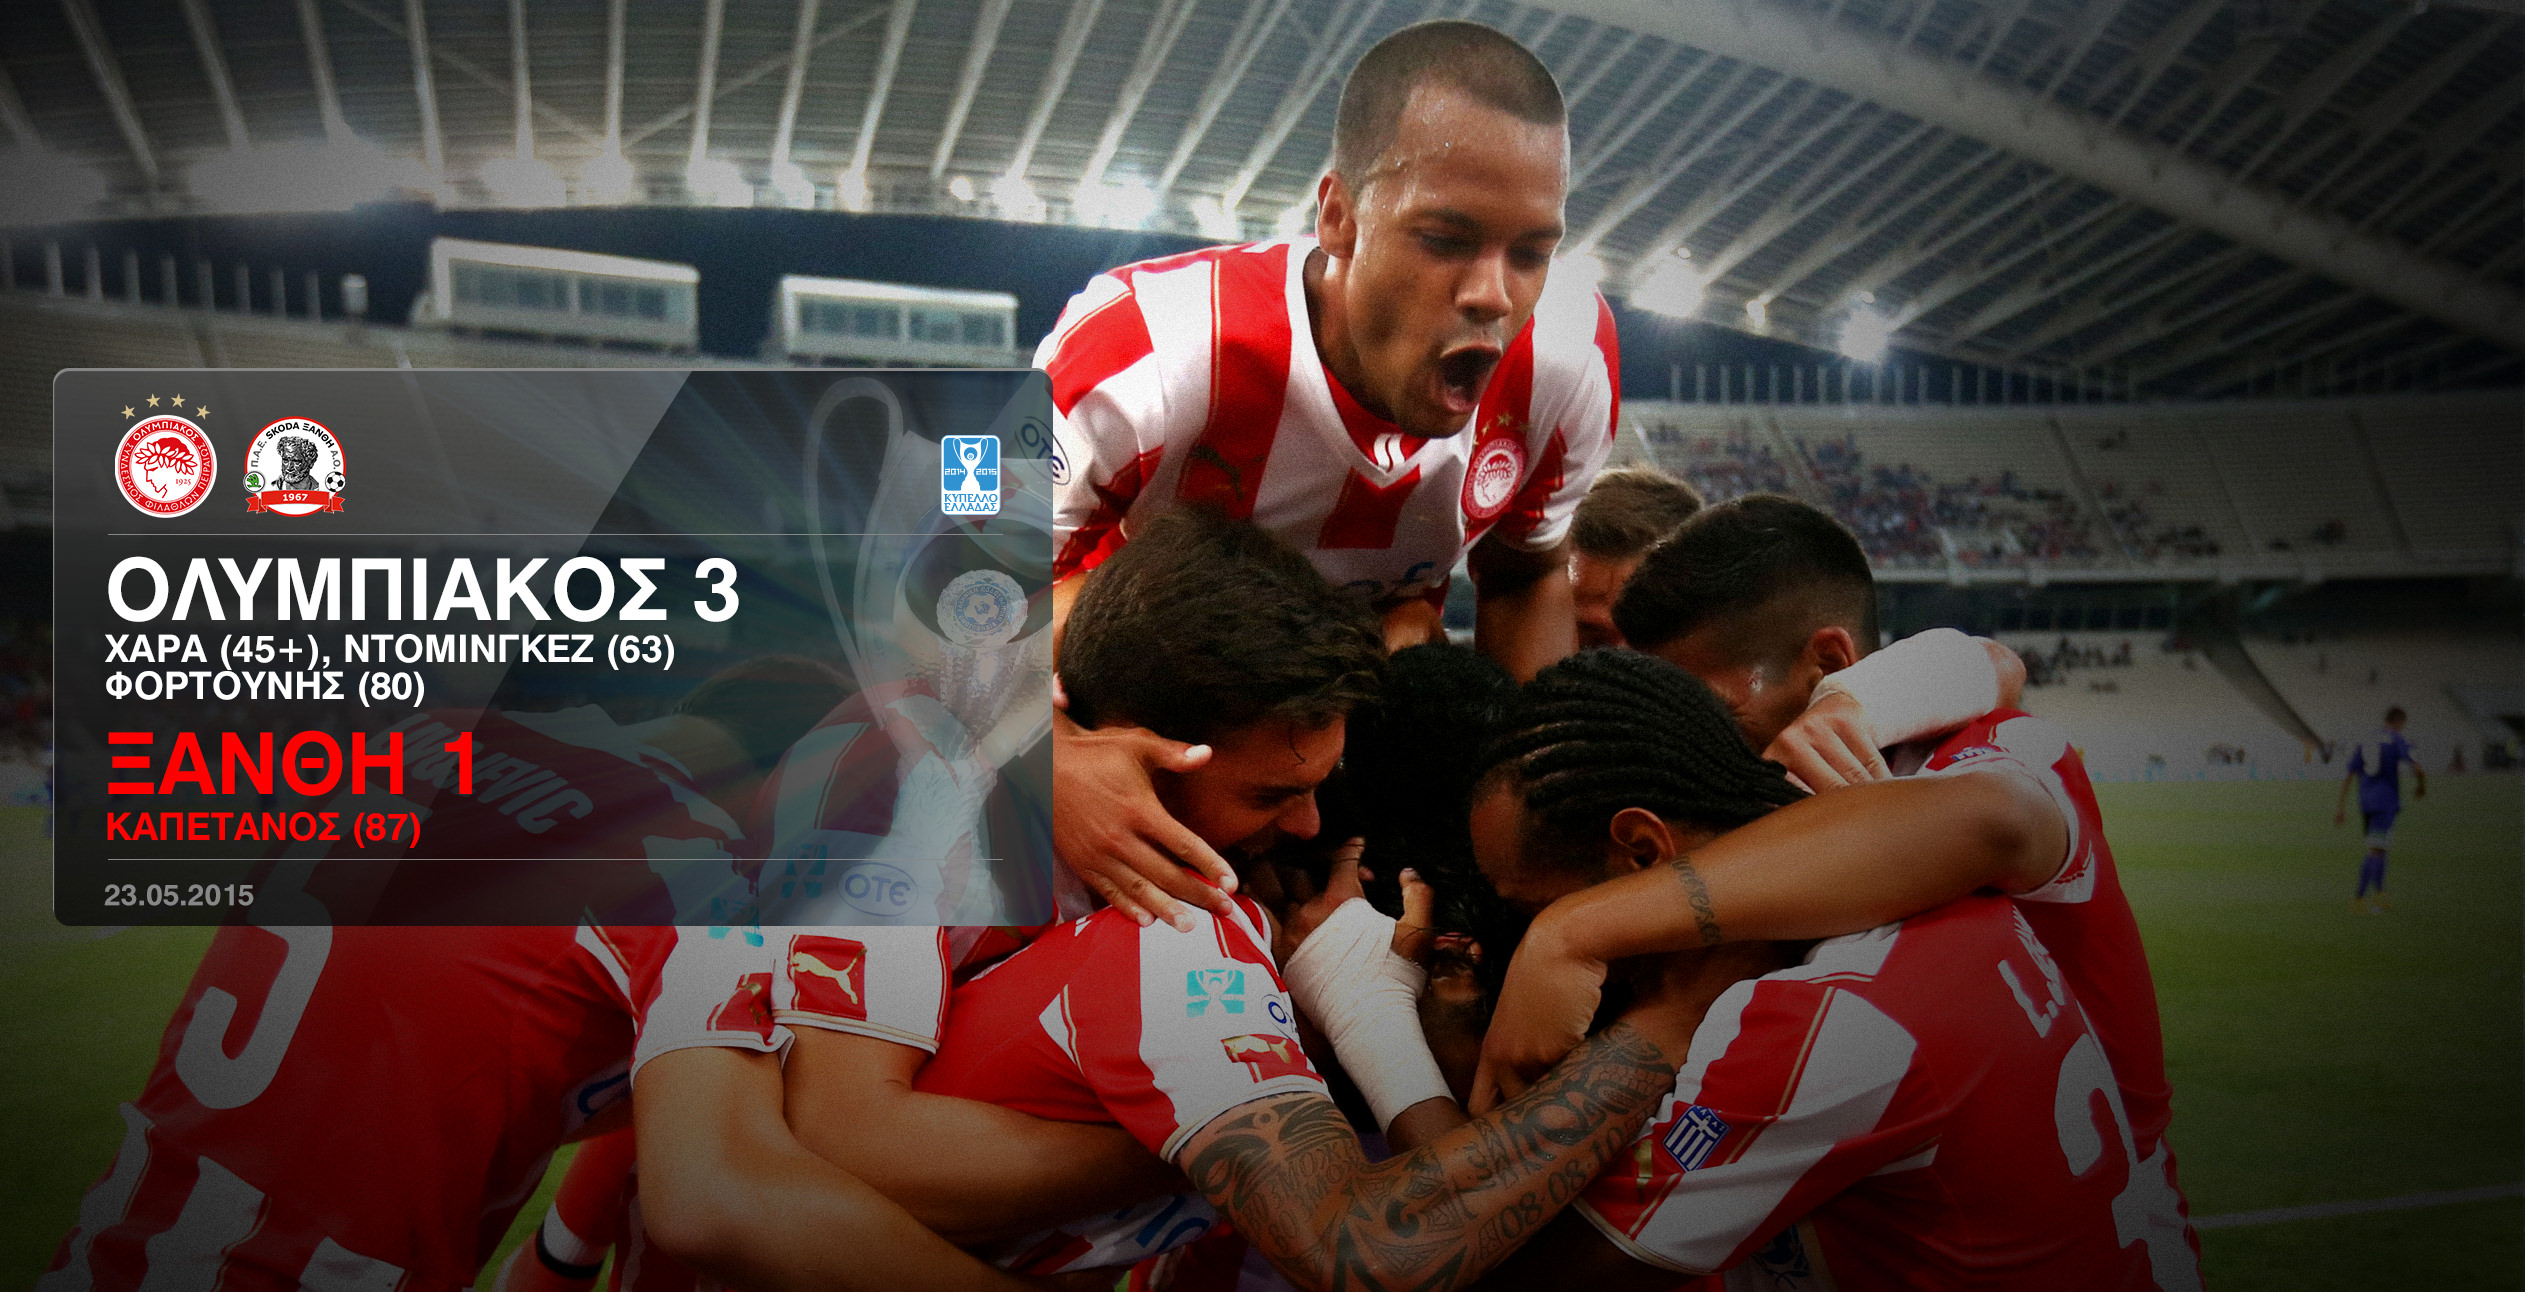 Olympiacos wins the double in Greece!